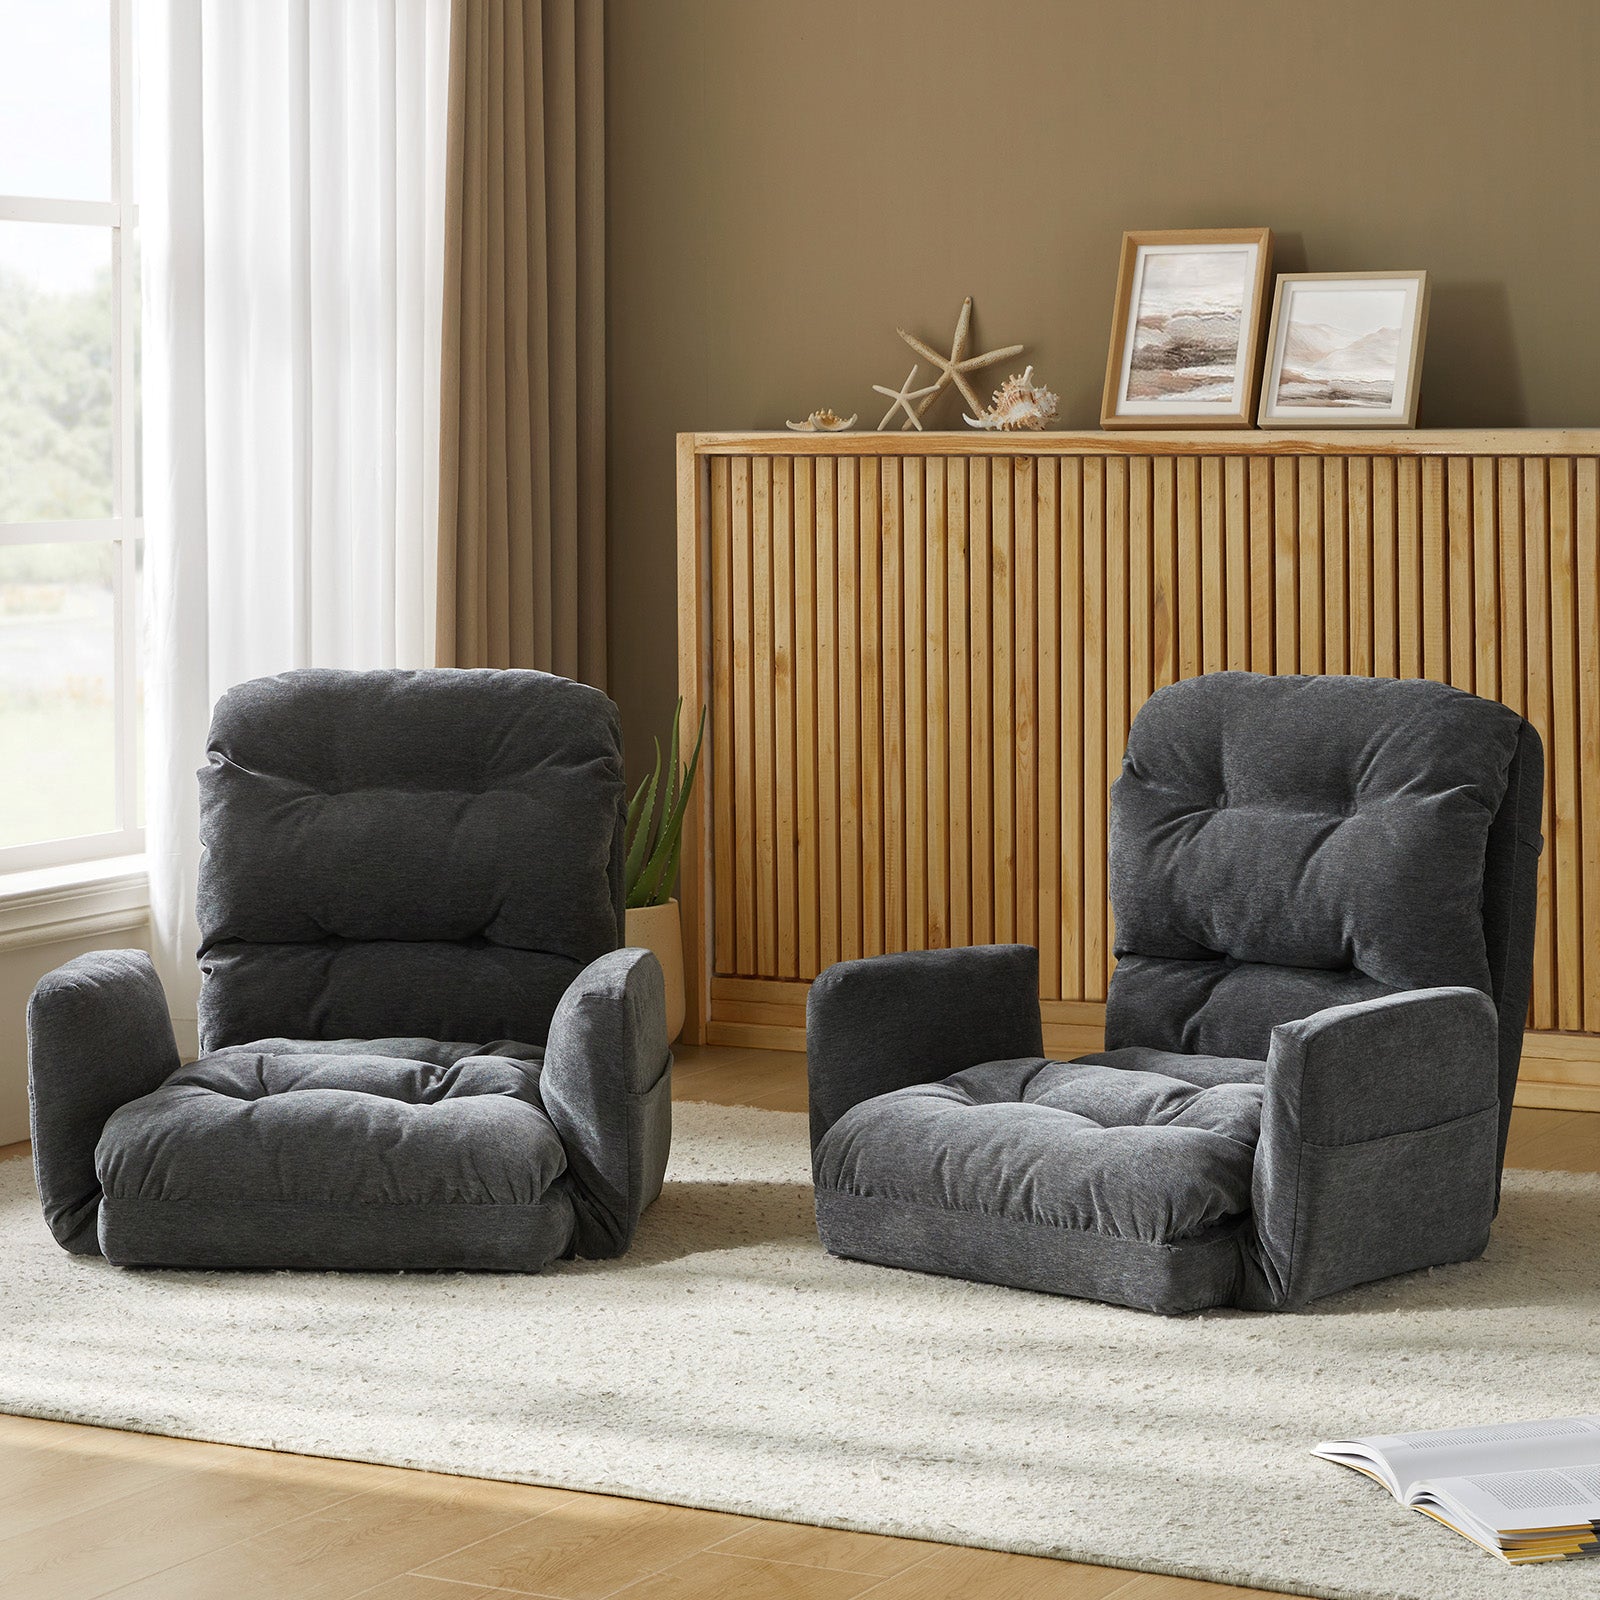 Faustus Reclining Floor Chair with Storage Armrest